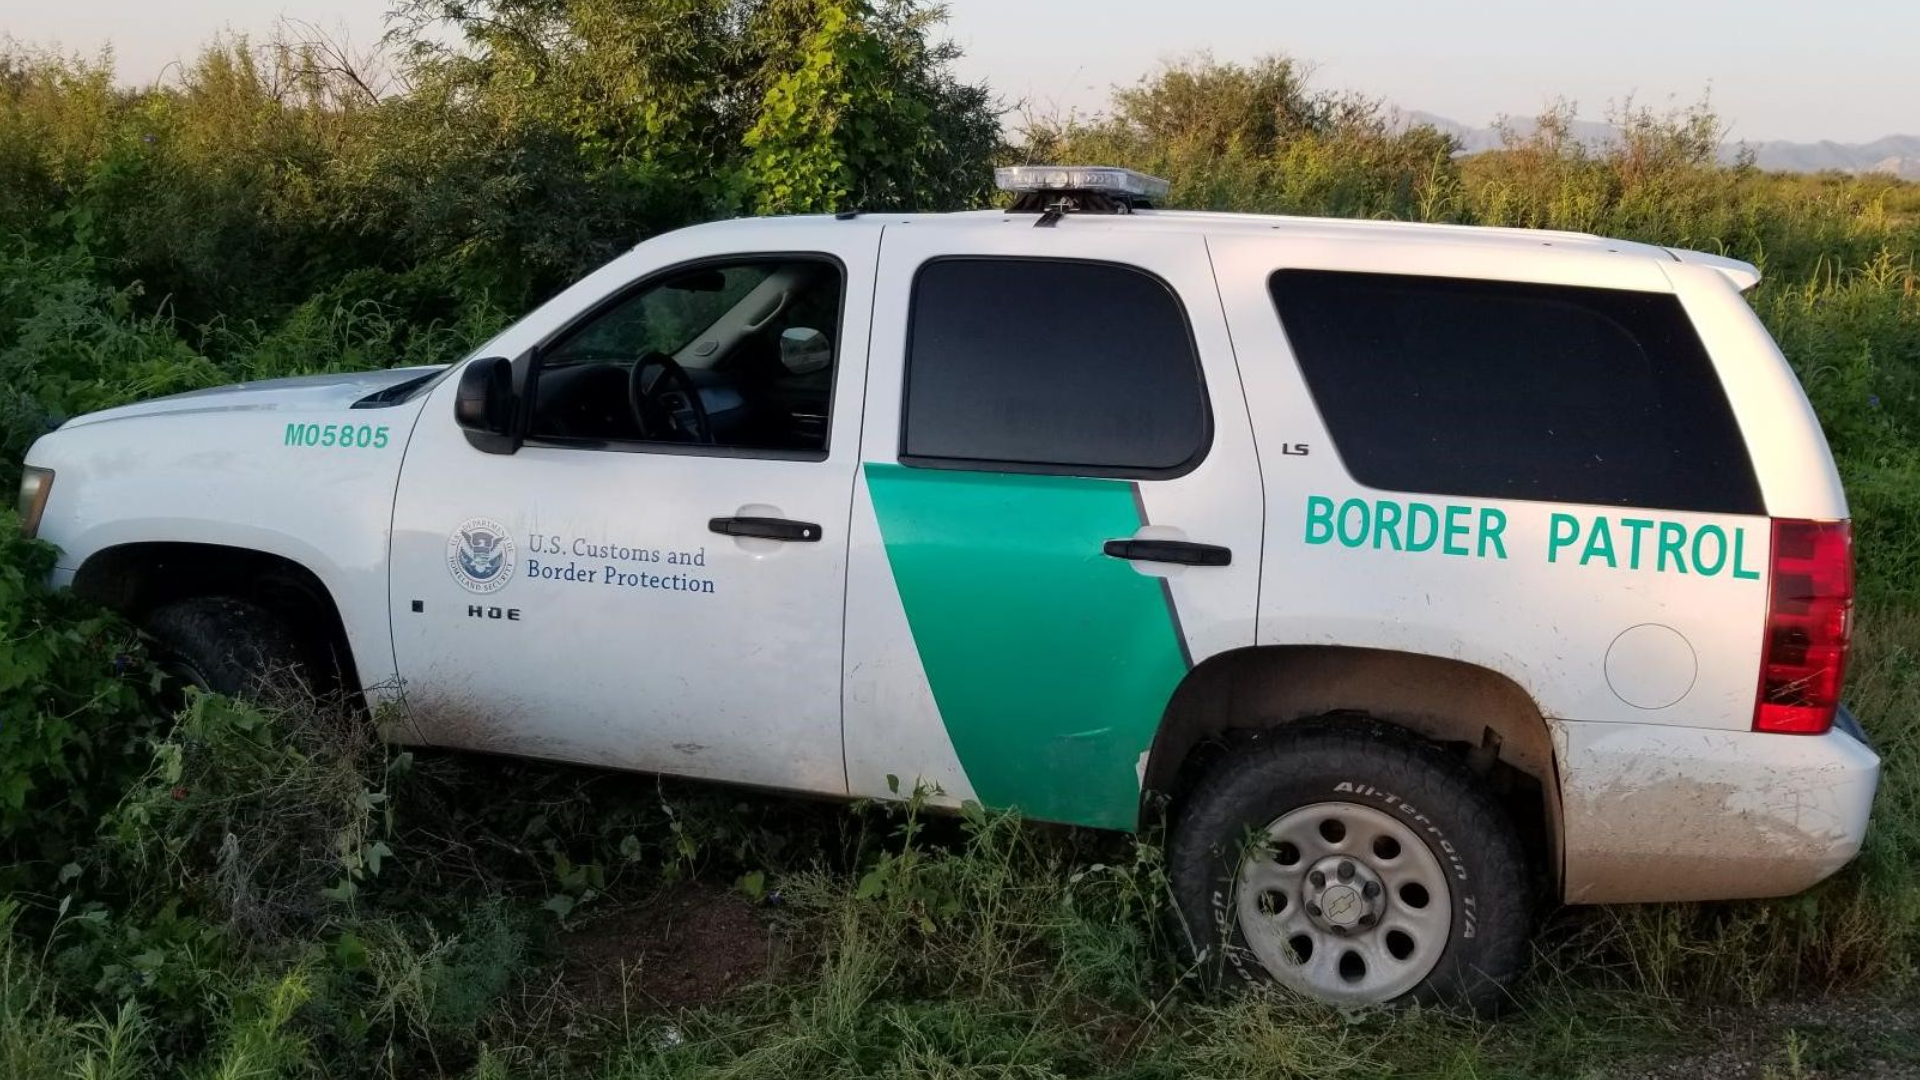 Smugglers and 10 migrants were busted by Border Patrol agents in Tucson using a fake Border Patrol vehicle. The smugglers even had fake uniforms on.